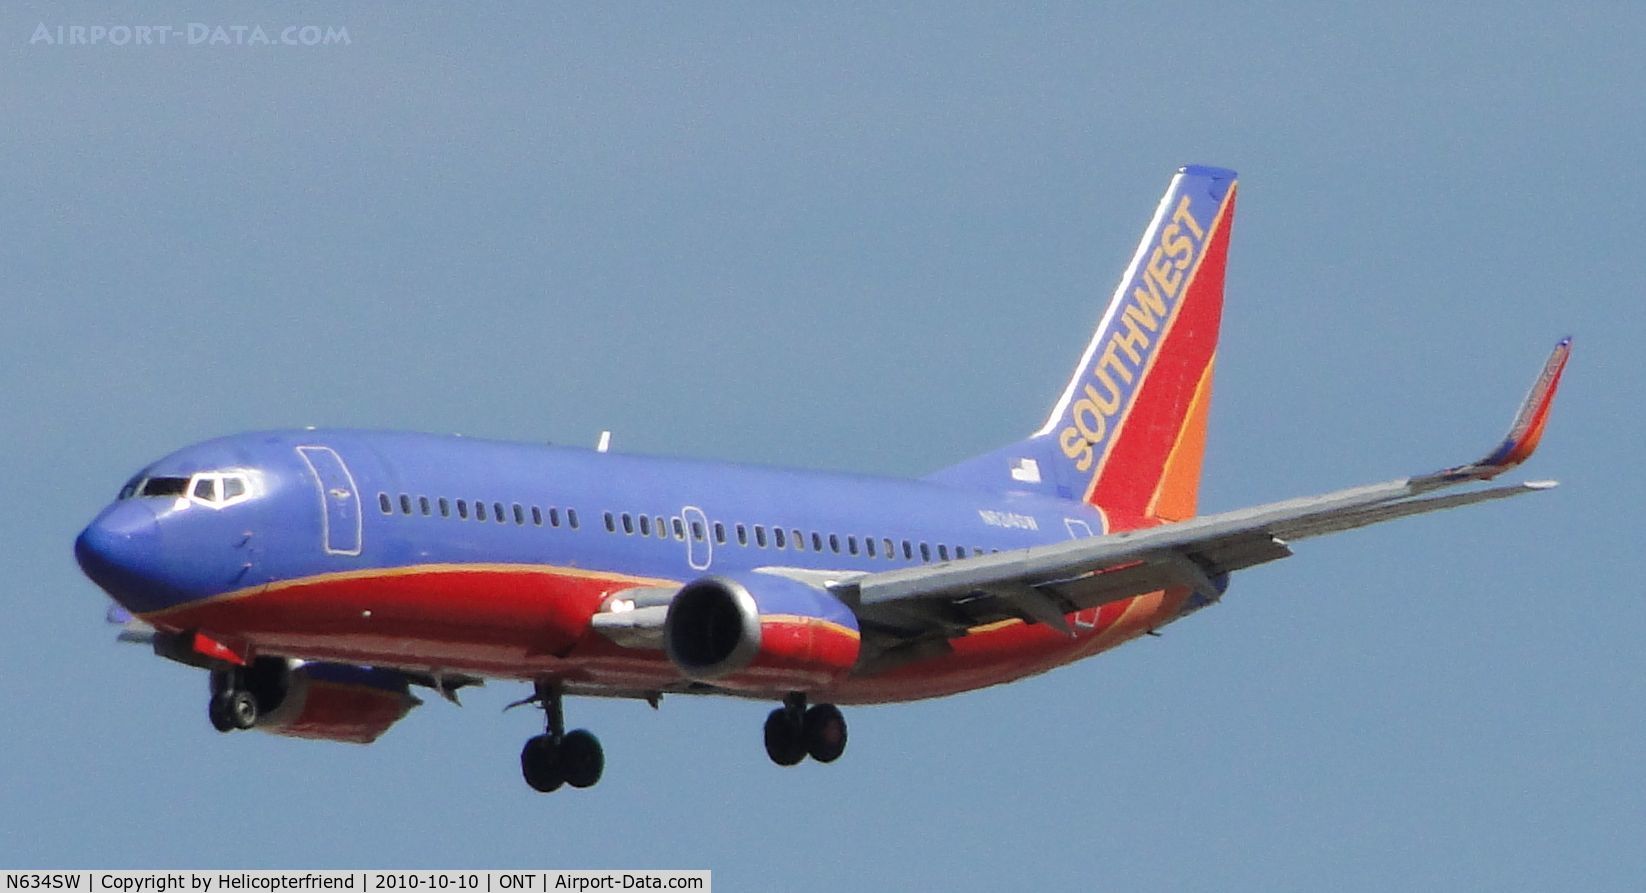 N634SW, 1996 Boeing 737-3H4 C/N 27937, On final to runway 26R before Military aircraft arrived